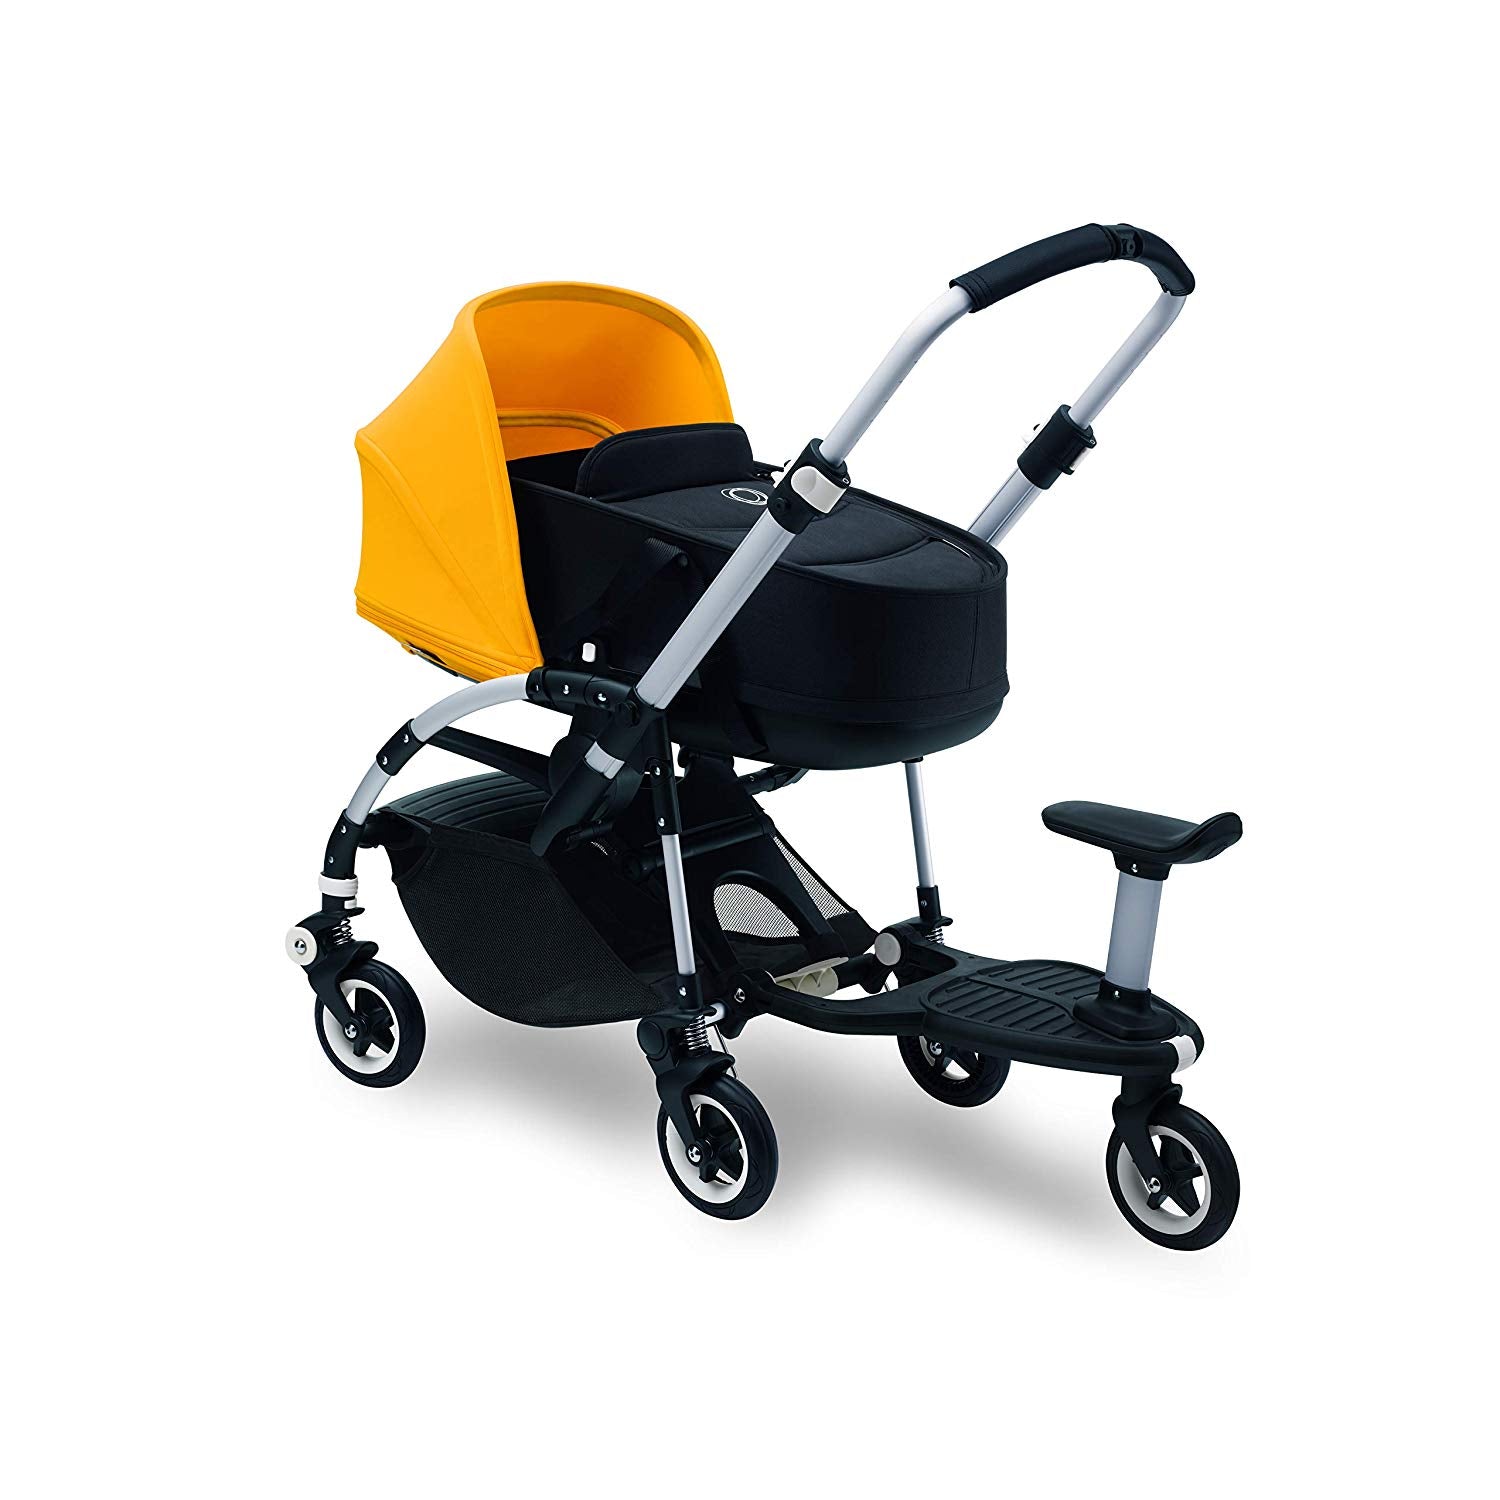 BUGABOO Comfort Wheeled Board Plus Adapter For Bugaboo Bee - BLACK - ANB Baby -$20 - $50